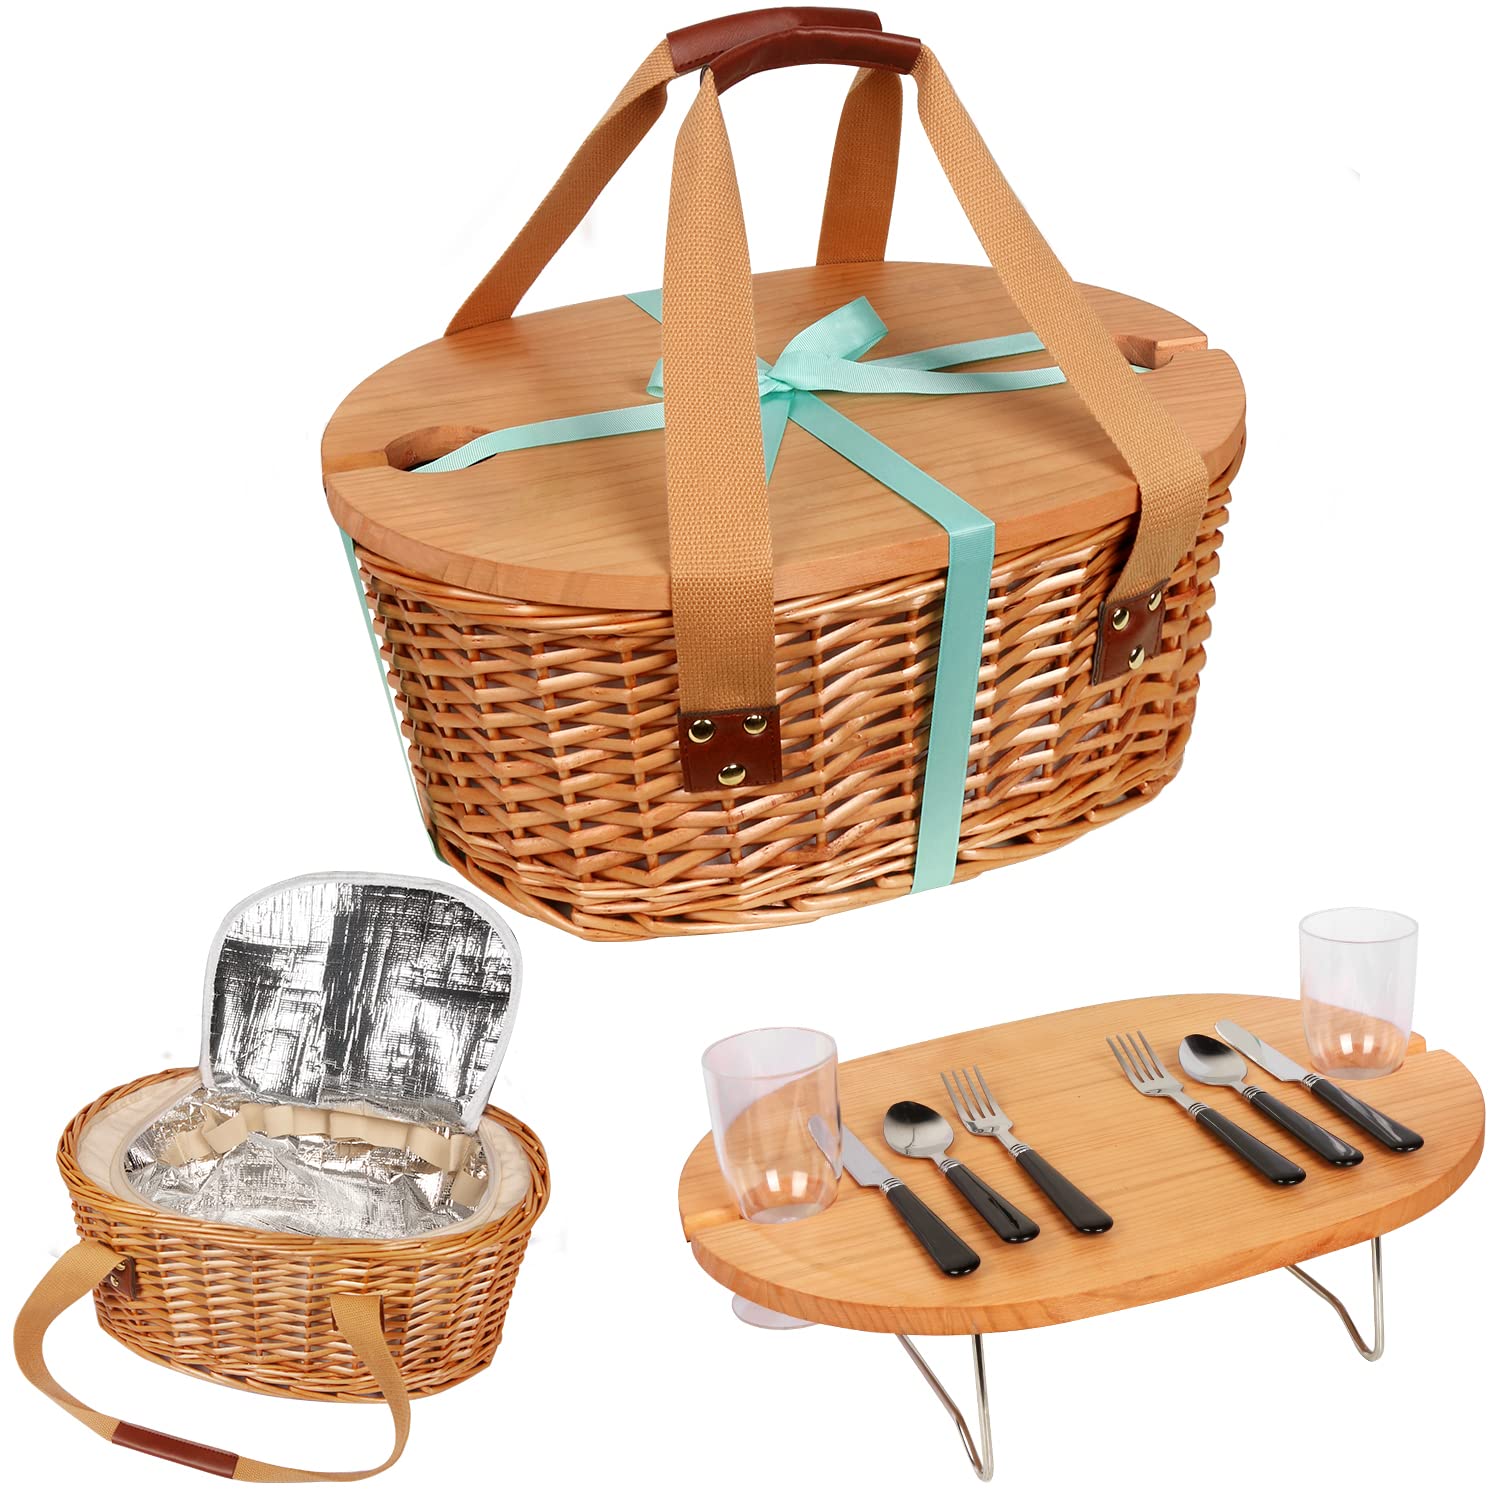 Hap Tim Wicker Picnic Basket Set For 2 With Mini Folding Wine Picnic Table  Large Insulated Cooler Bag  Cutlery Service Kits F